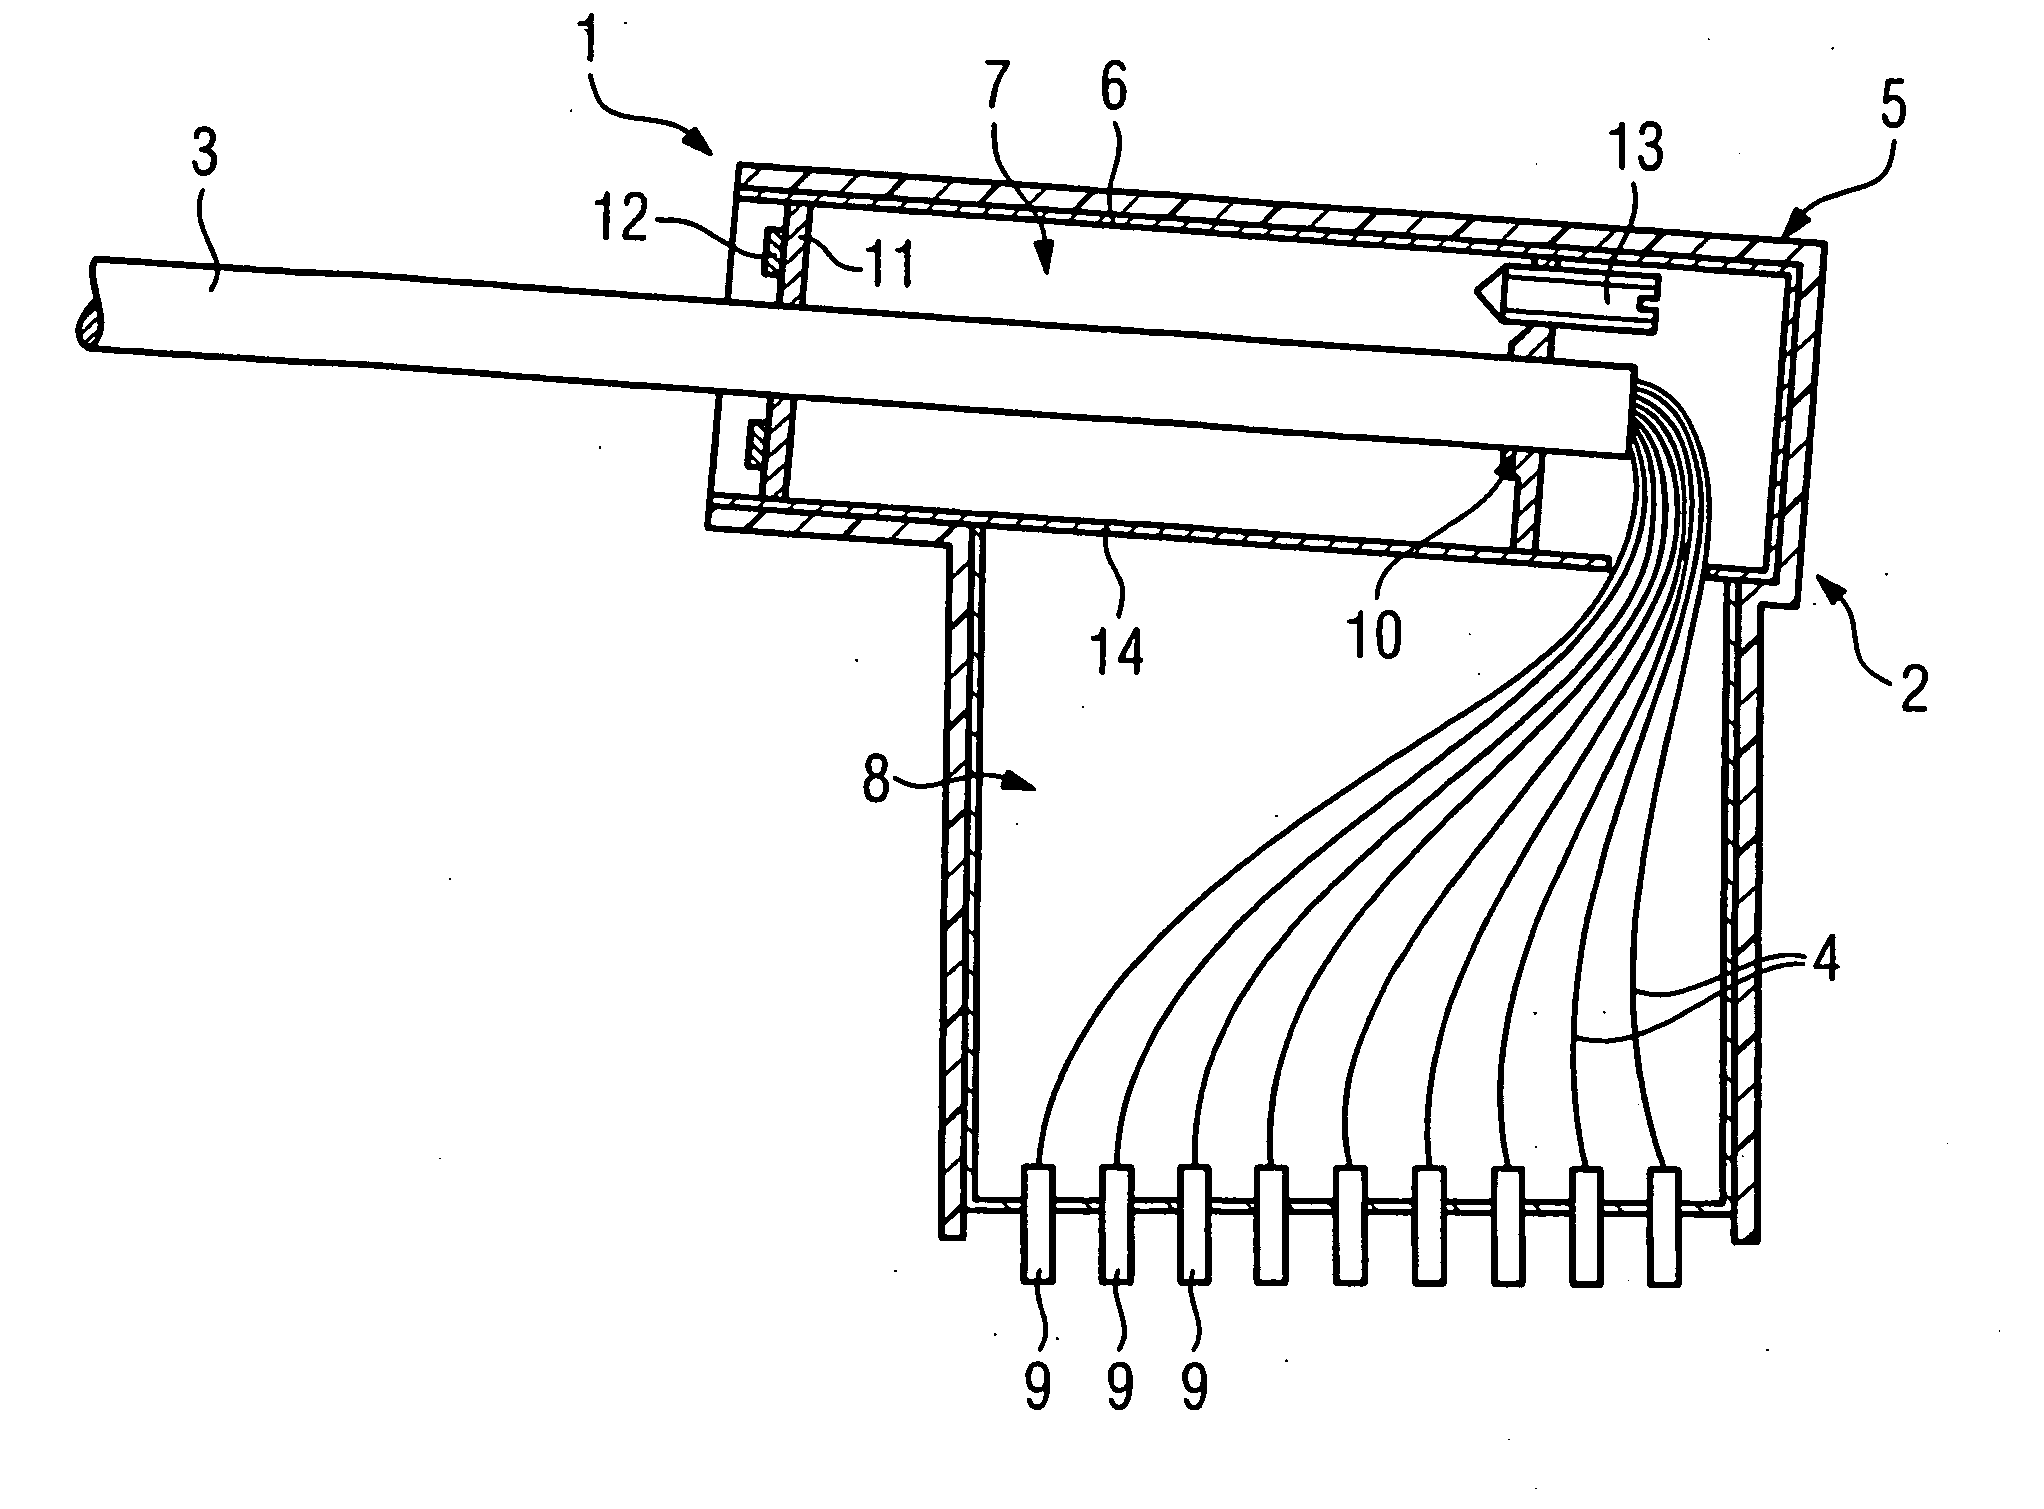 Feed line for a local coil for magnetic resonance imaging with standing wave barrier integrated into the plug thereof